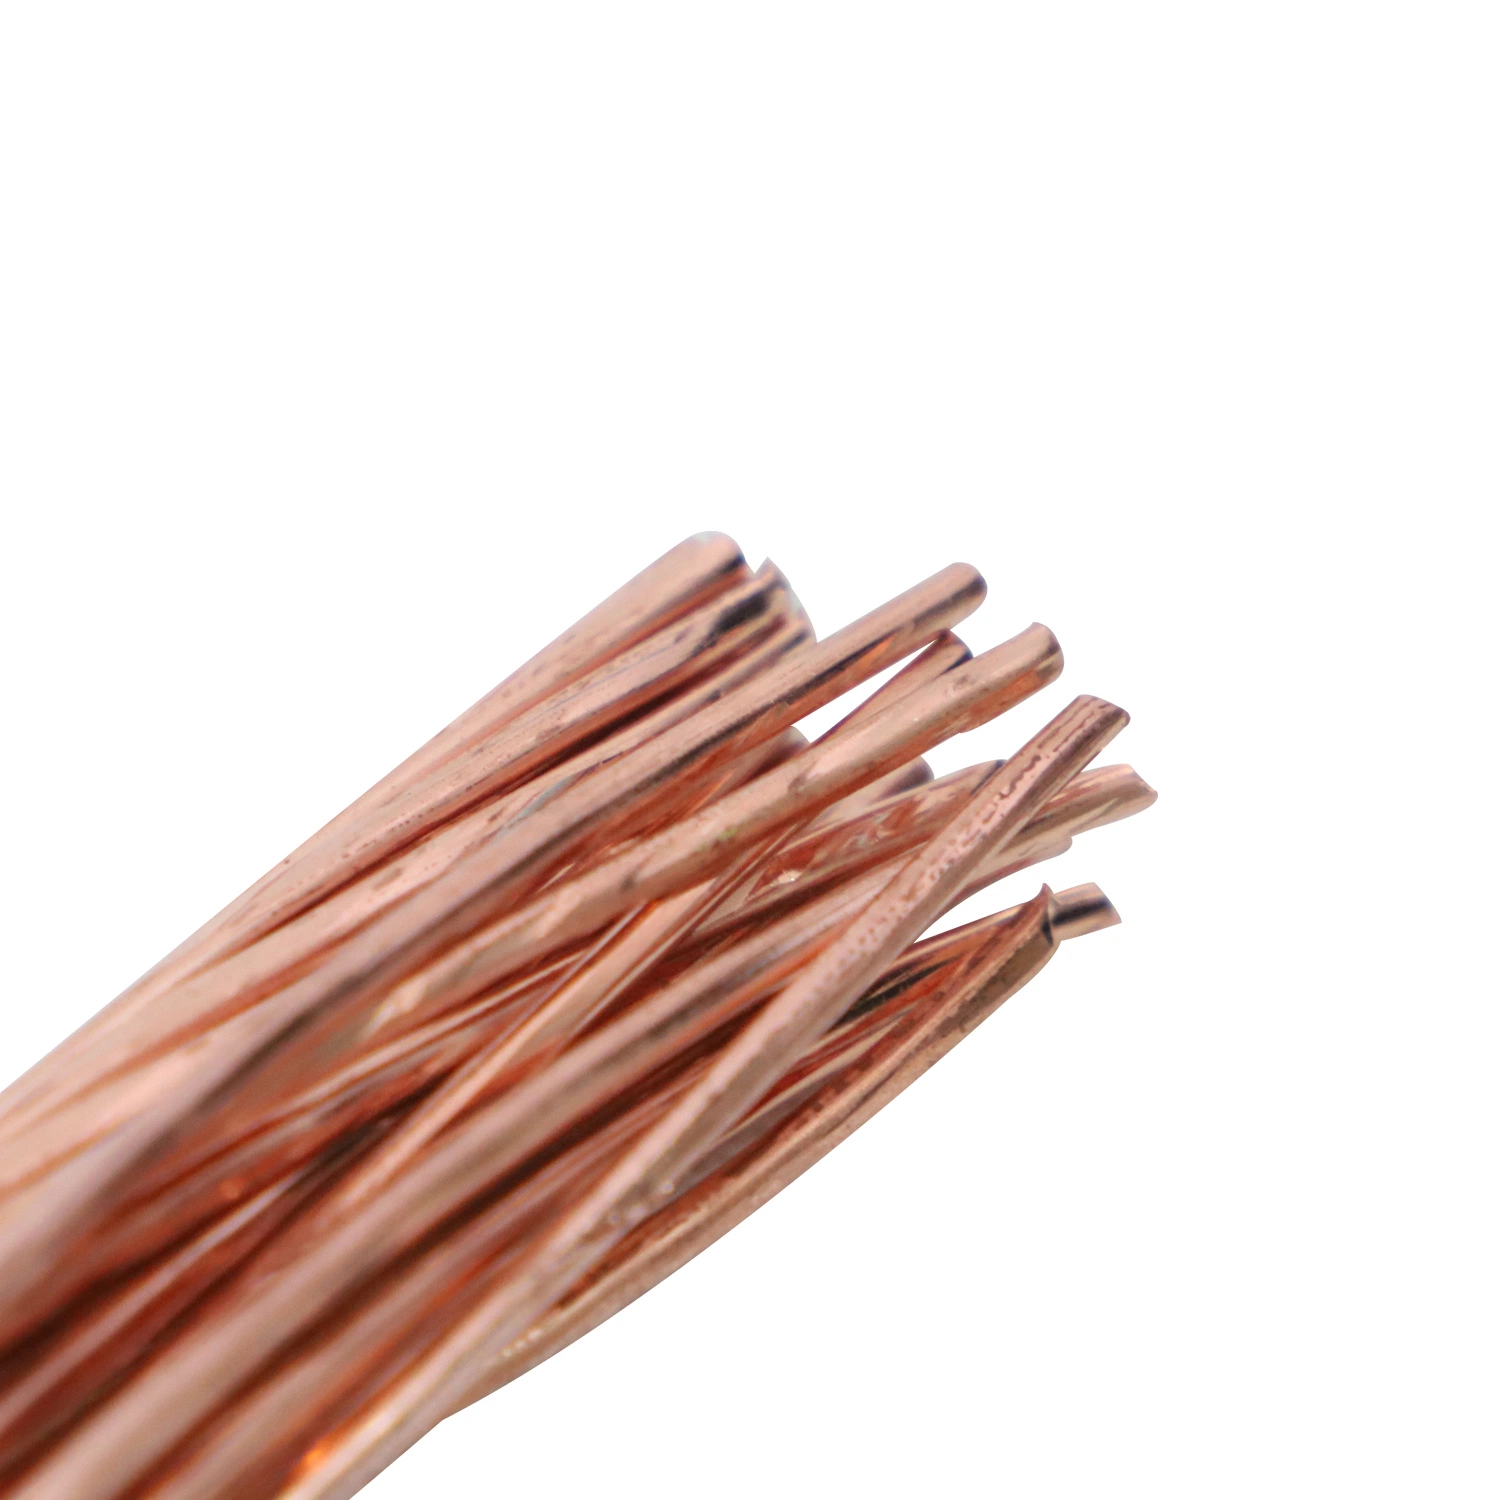 China Factory Wholesale Low Price Scrap Copper, Copper Wire, No Impurities, Good Quality